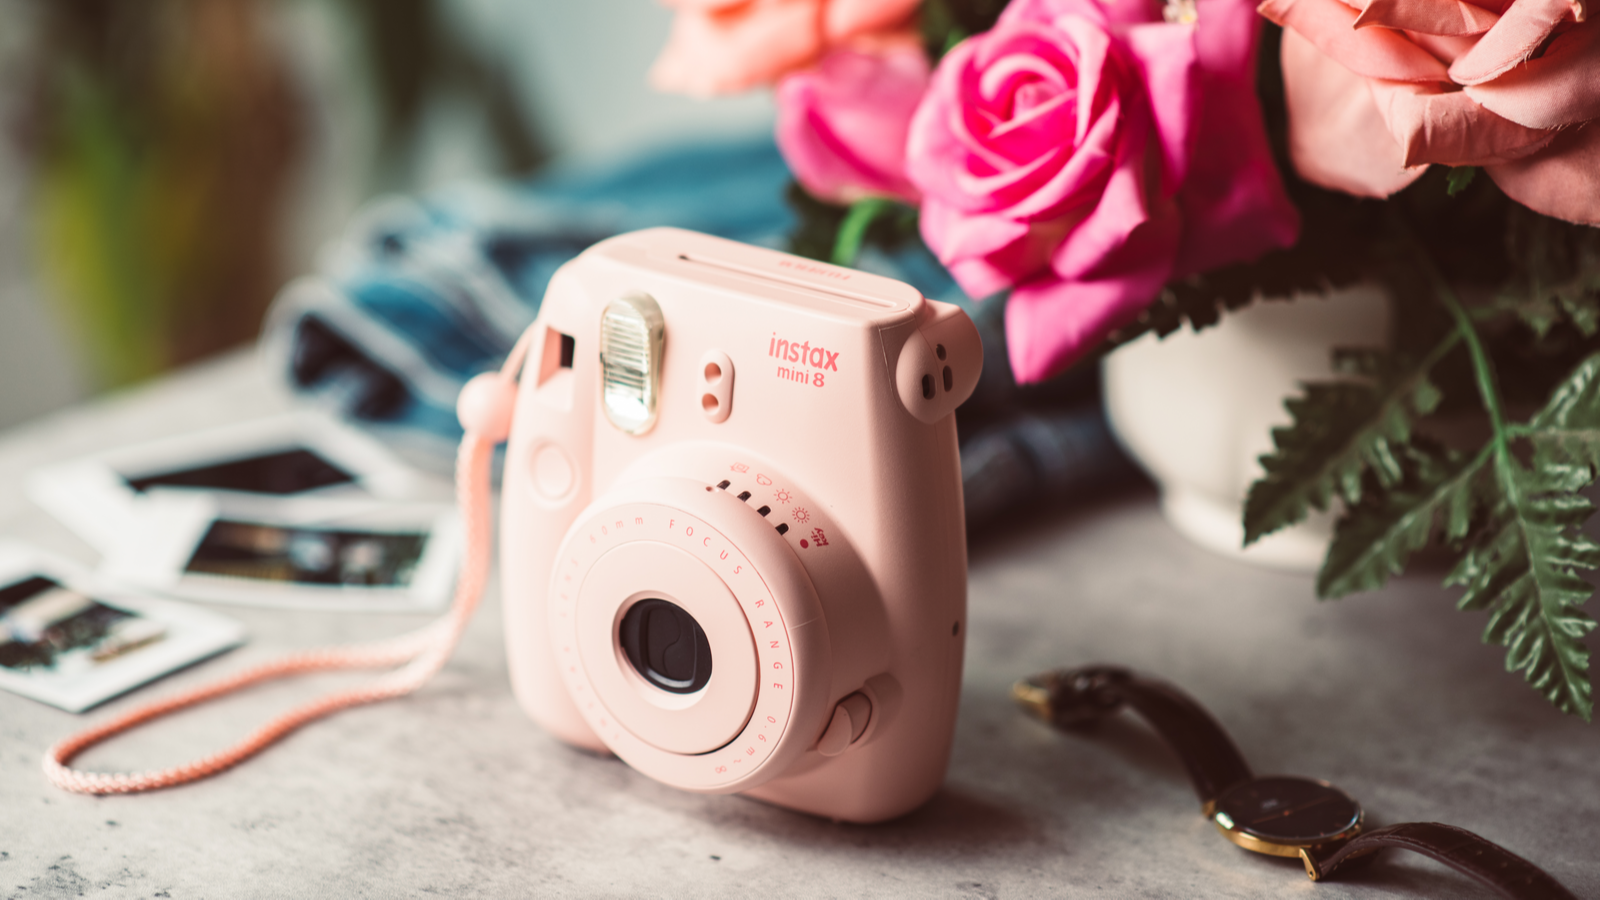 The pink Fujifilm Instax mini 8 on table next to photos, a watch, and a small vase of bright roses